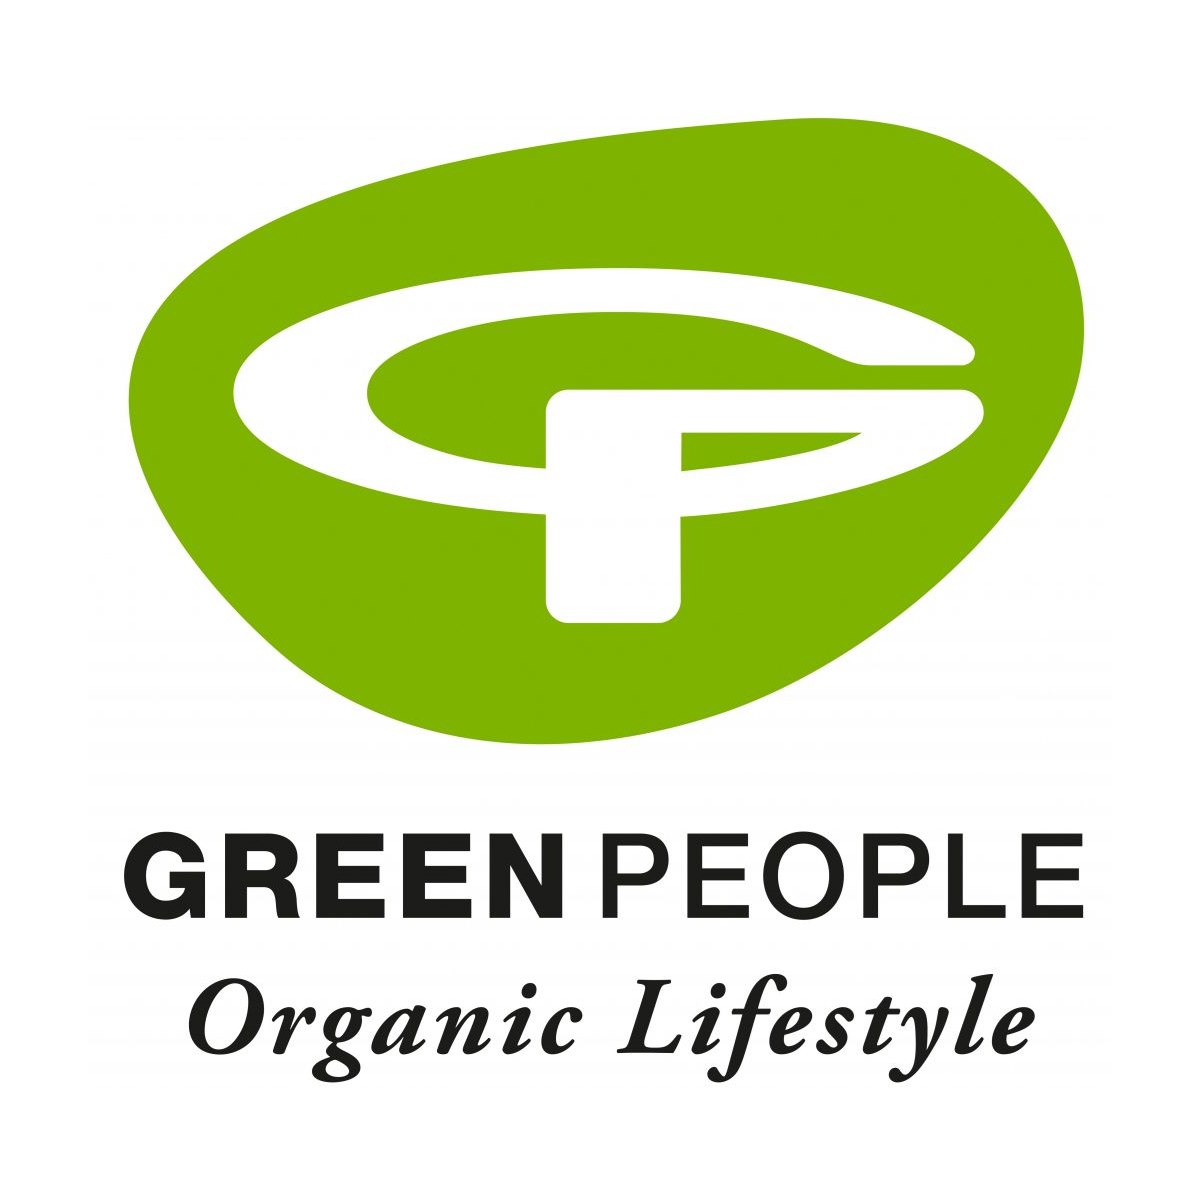 Where to Buy Green People Products